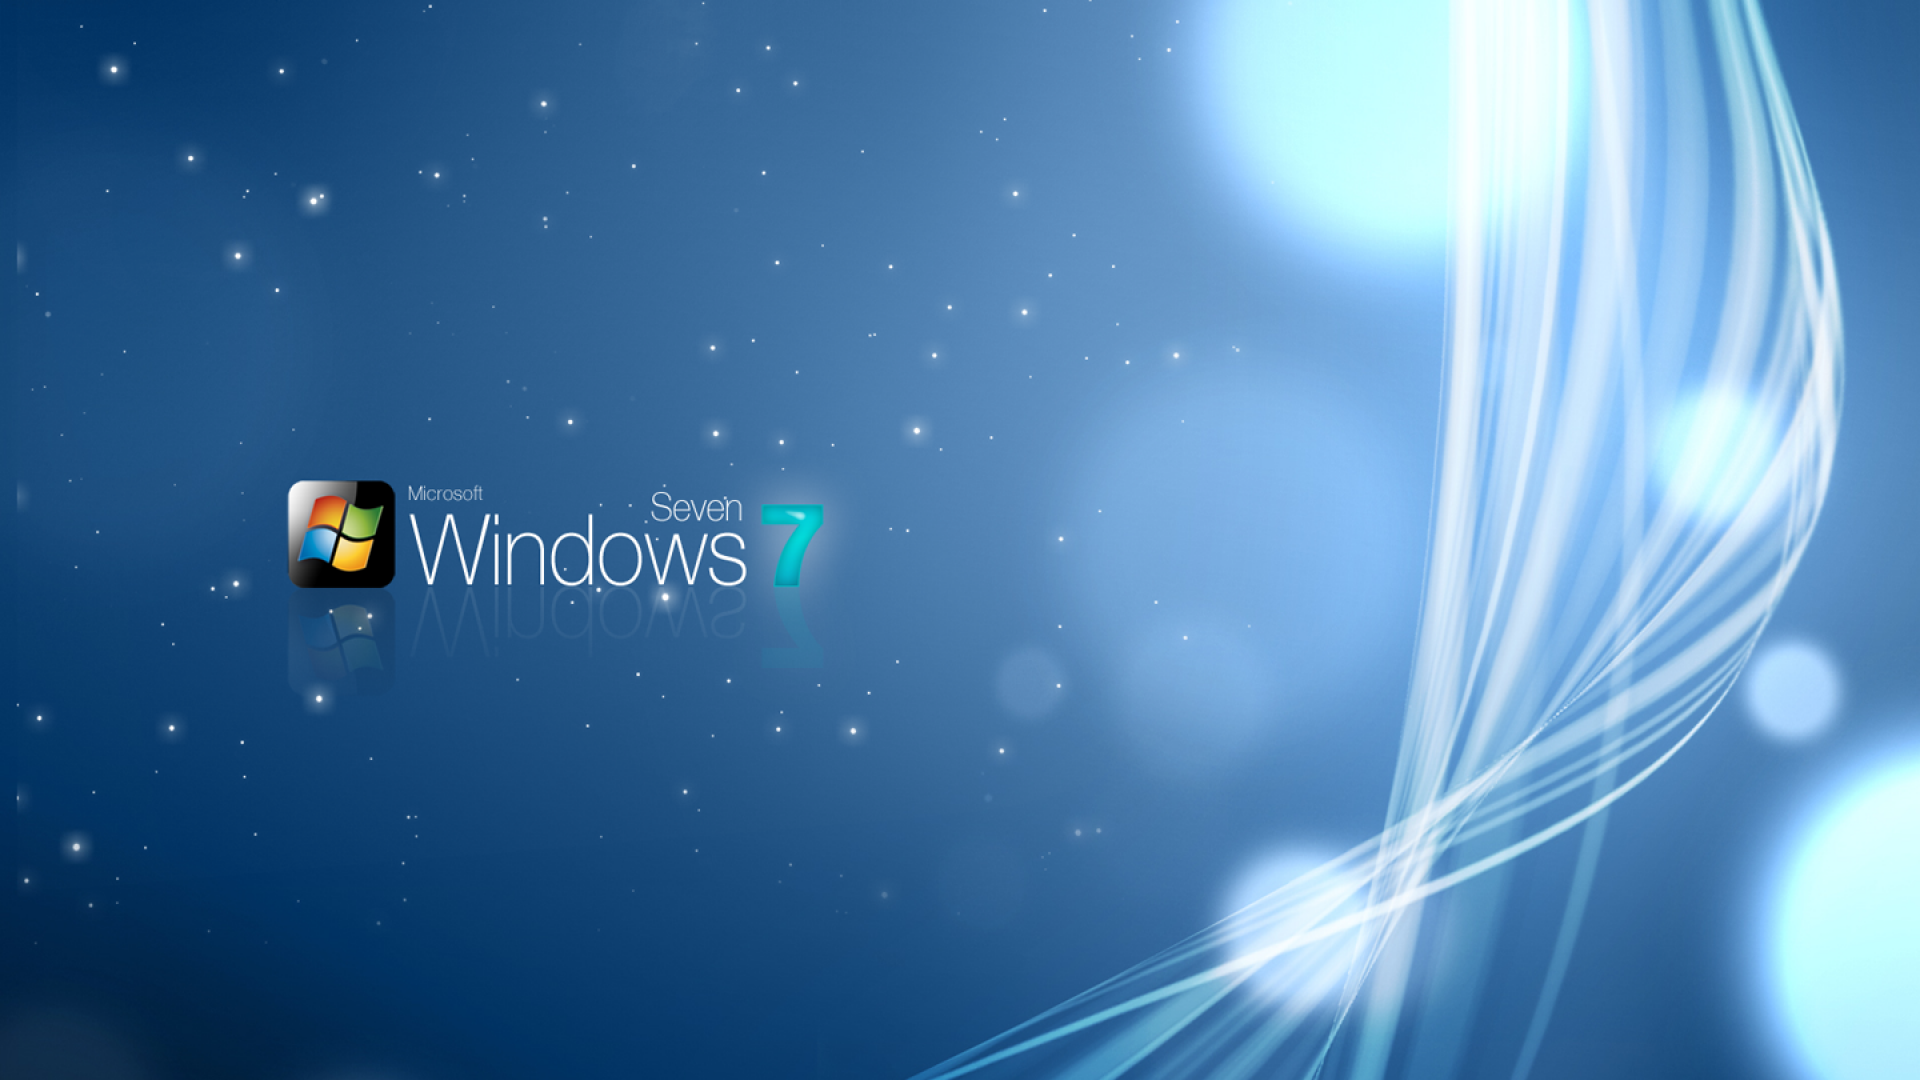 Windows 7 Sparkly Wallpaper - HD Wallpapers